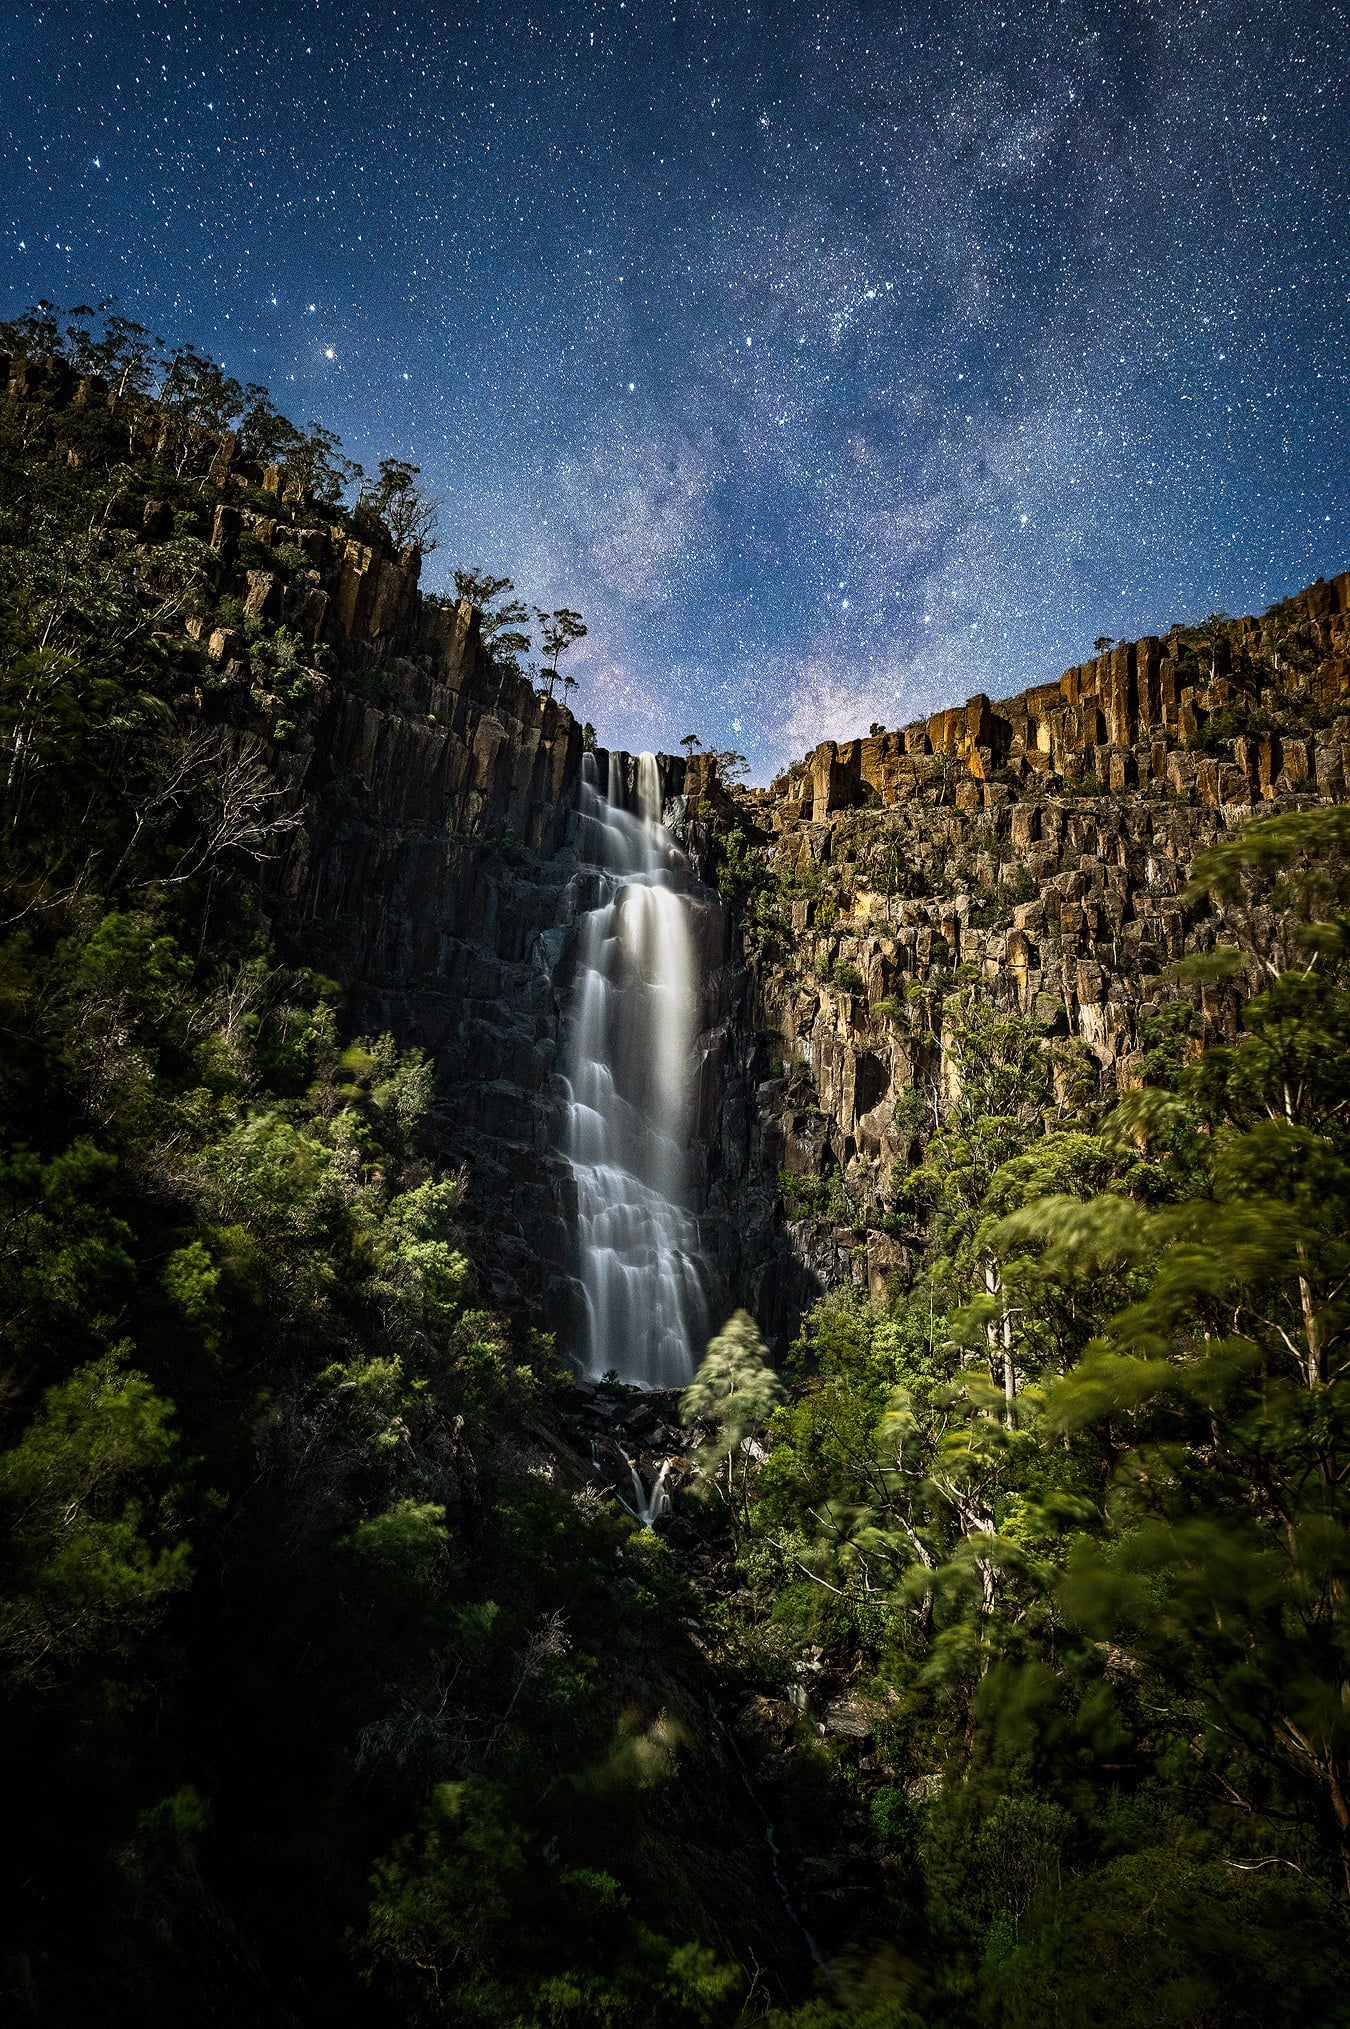 Star Fall - Australian Geographic Nature Photographer of the Year shortlist 2022